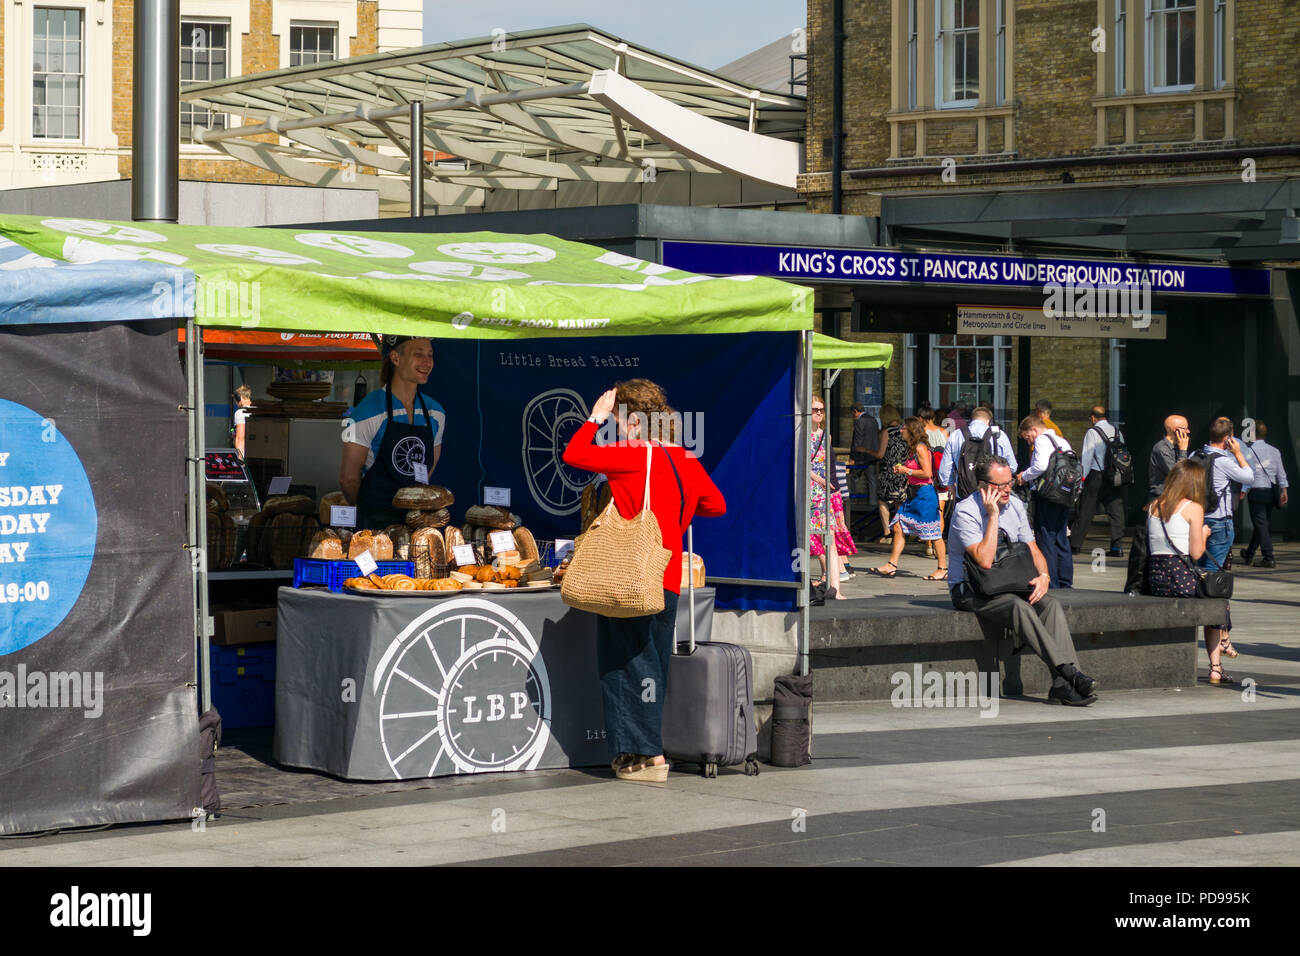 A small artisan bread and baked goods market stall with woman browsing goods on display outside Kings Cross train station, London, UK Stock Photo